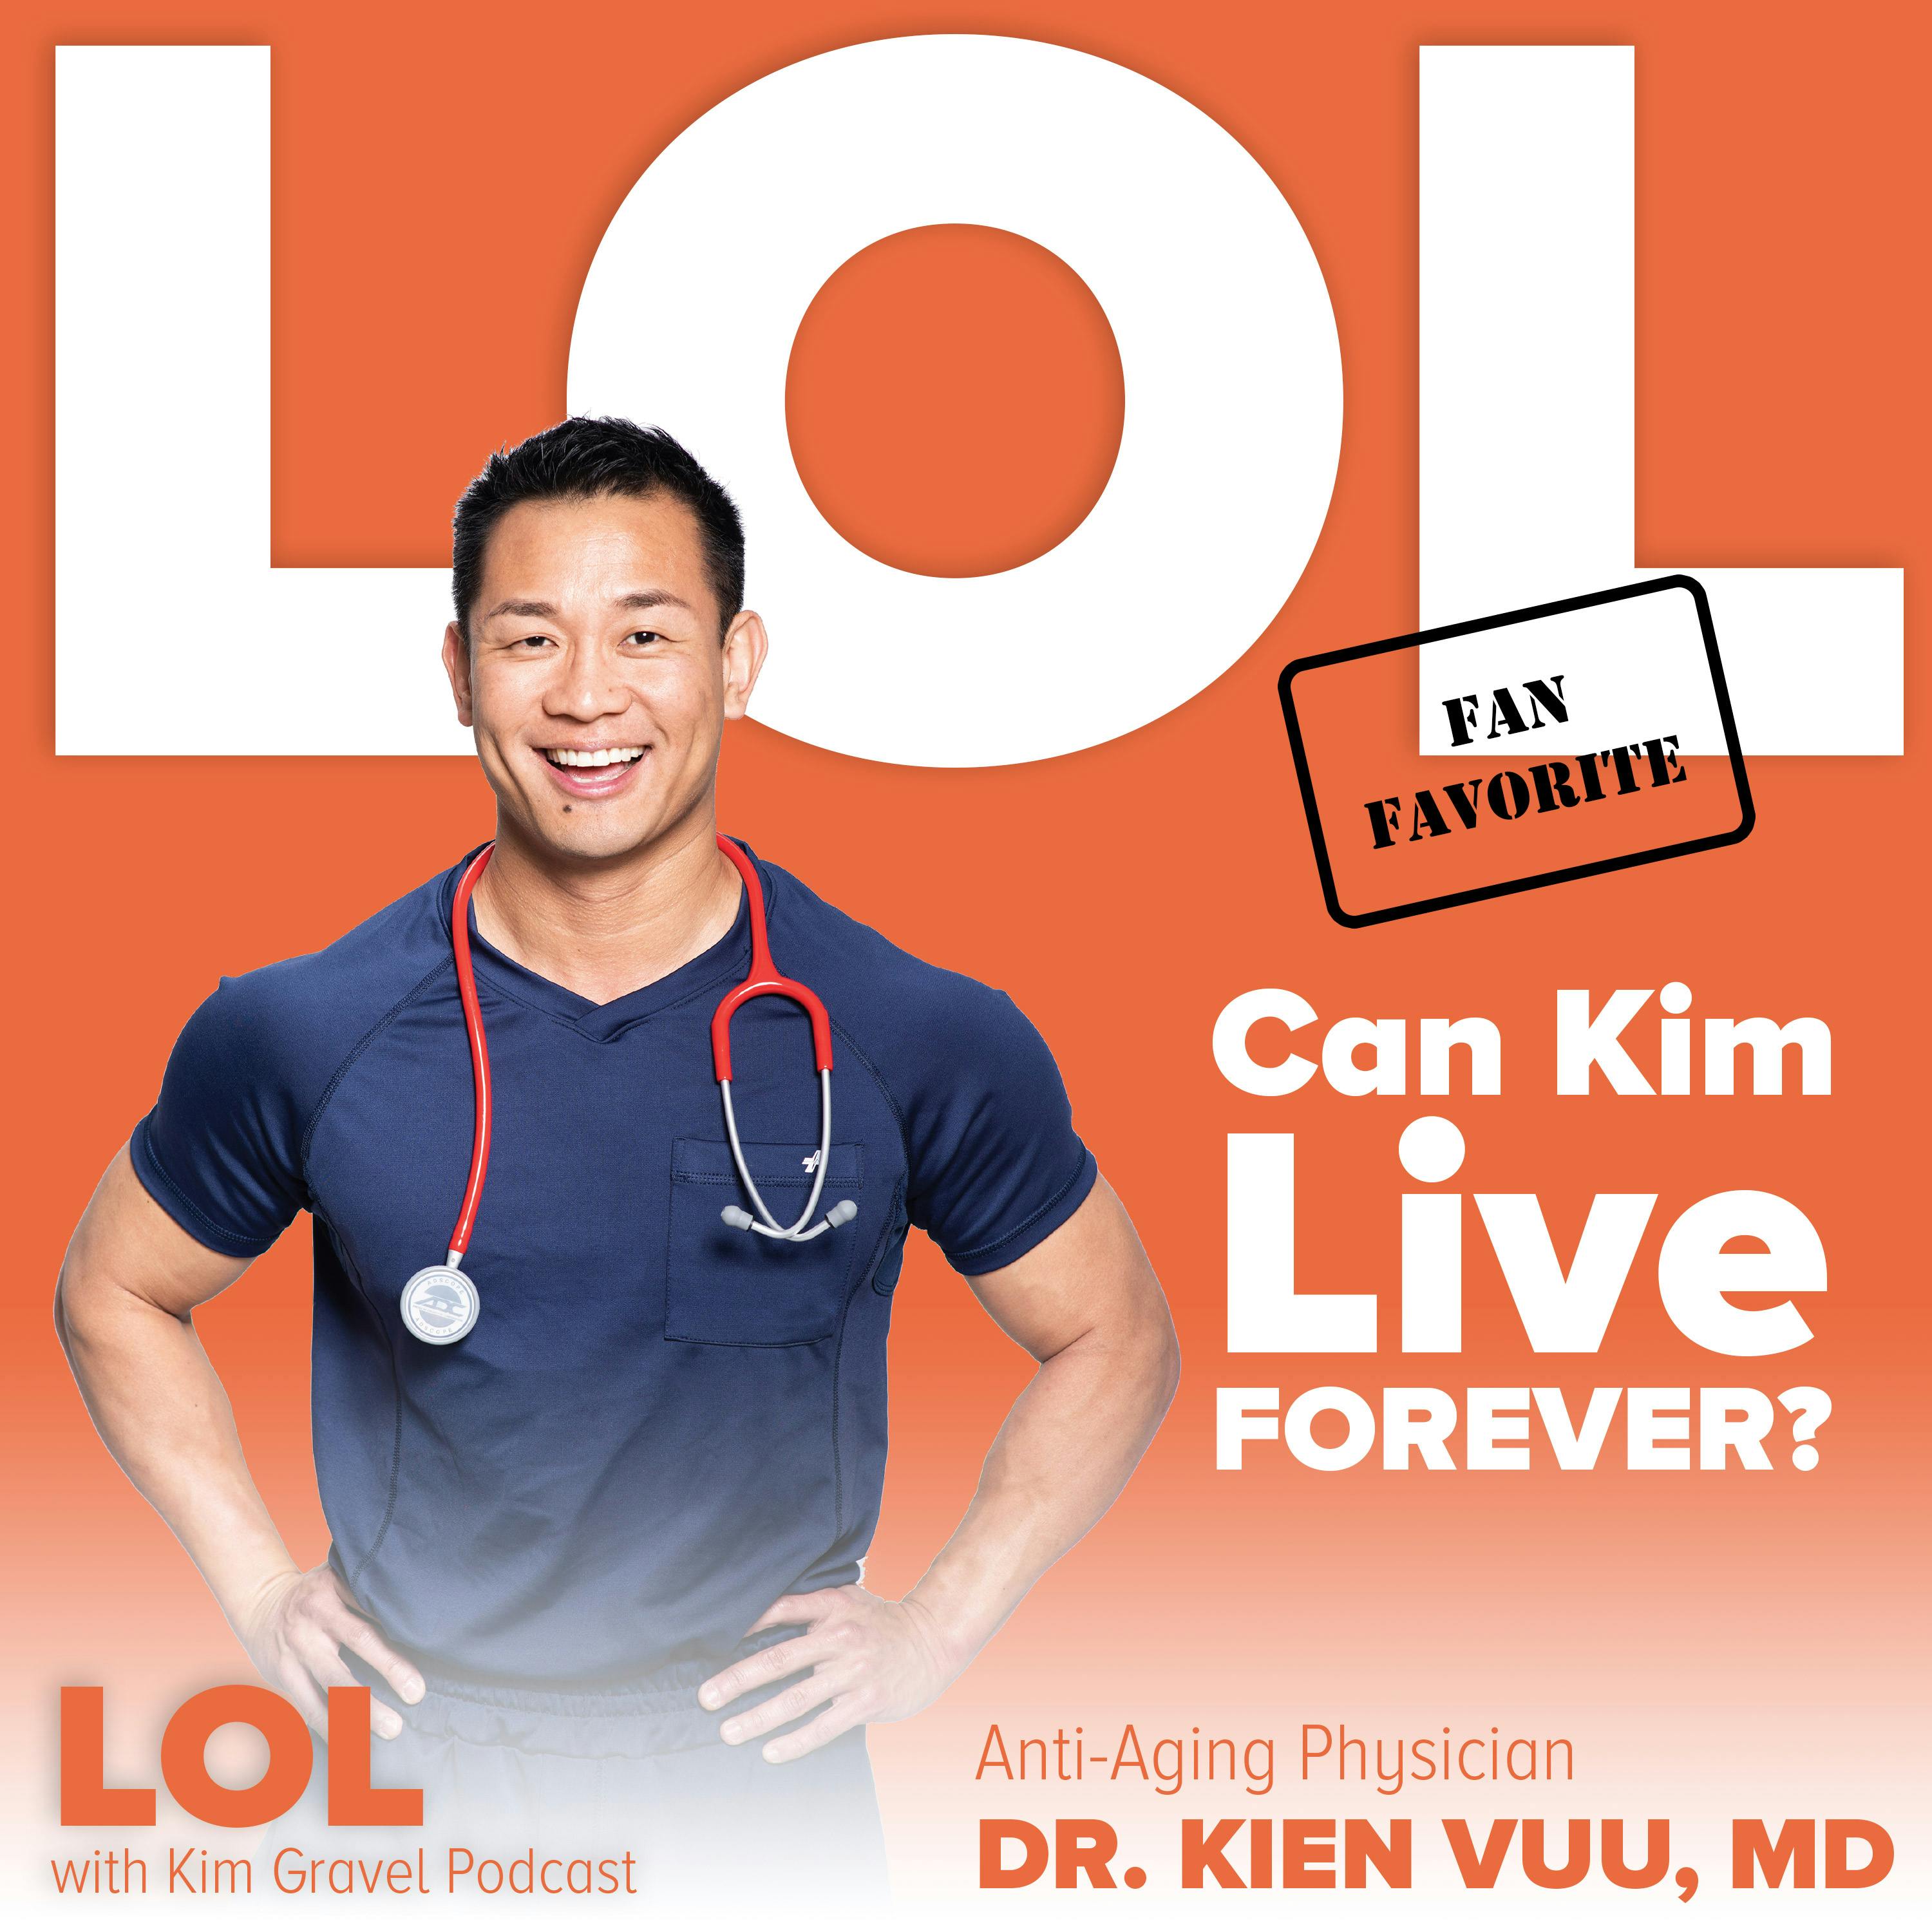 Fan Favorite: Can Kim Live Forever? With Dr. Kien Vuu, MD Image